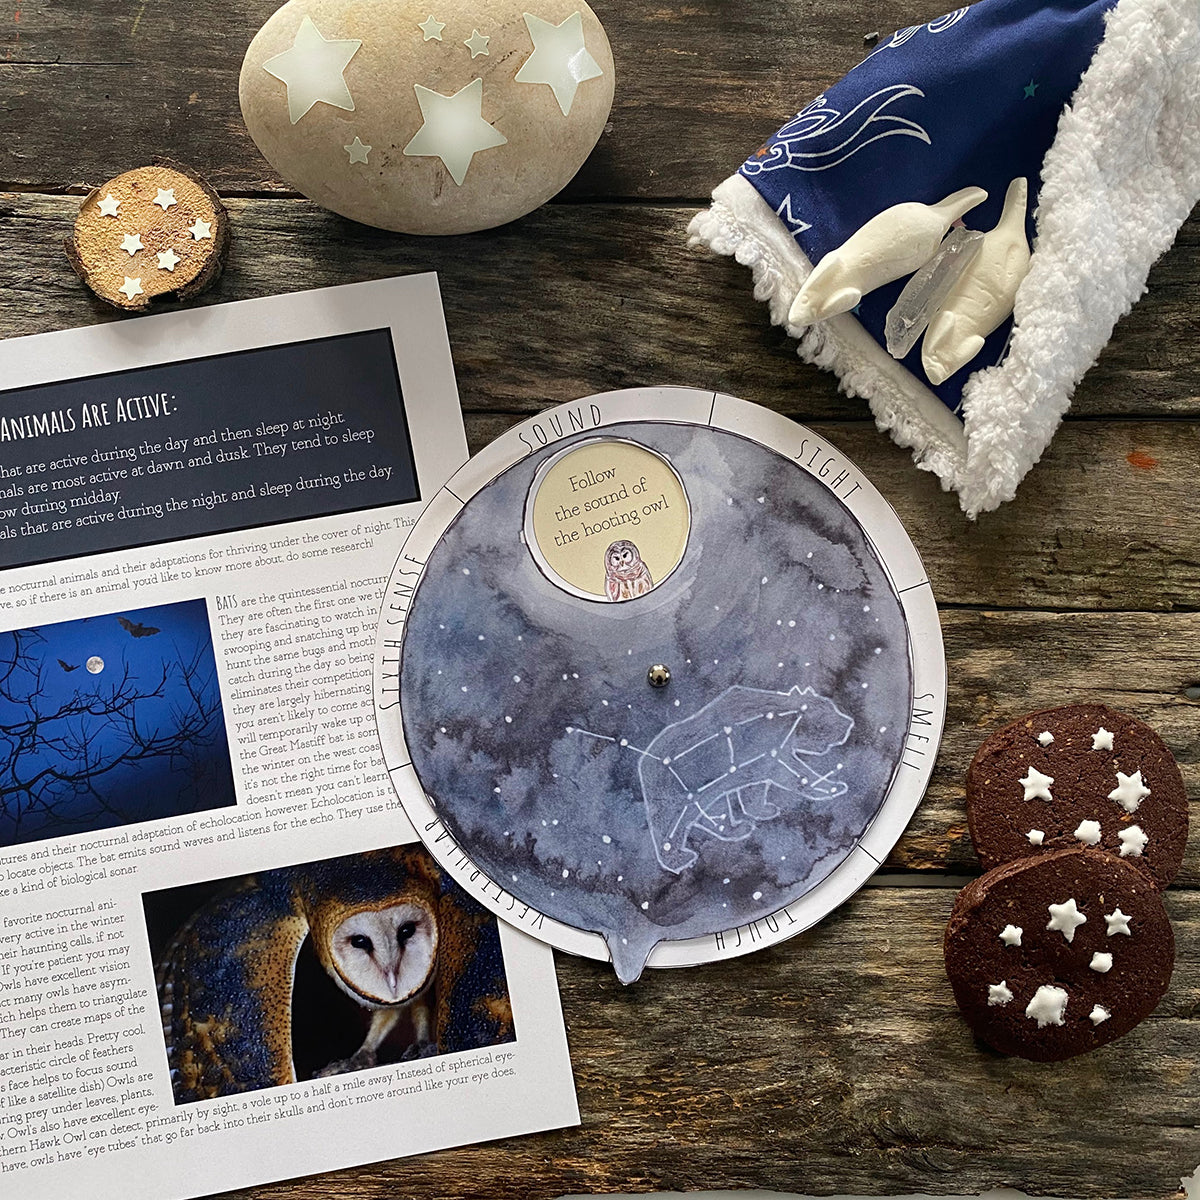 Winter Solstice: Celebrating the Longest Night by Wineberry Wood Press